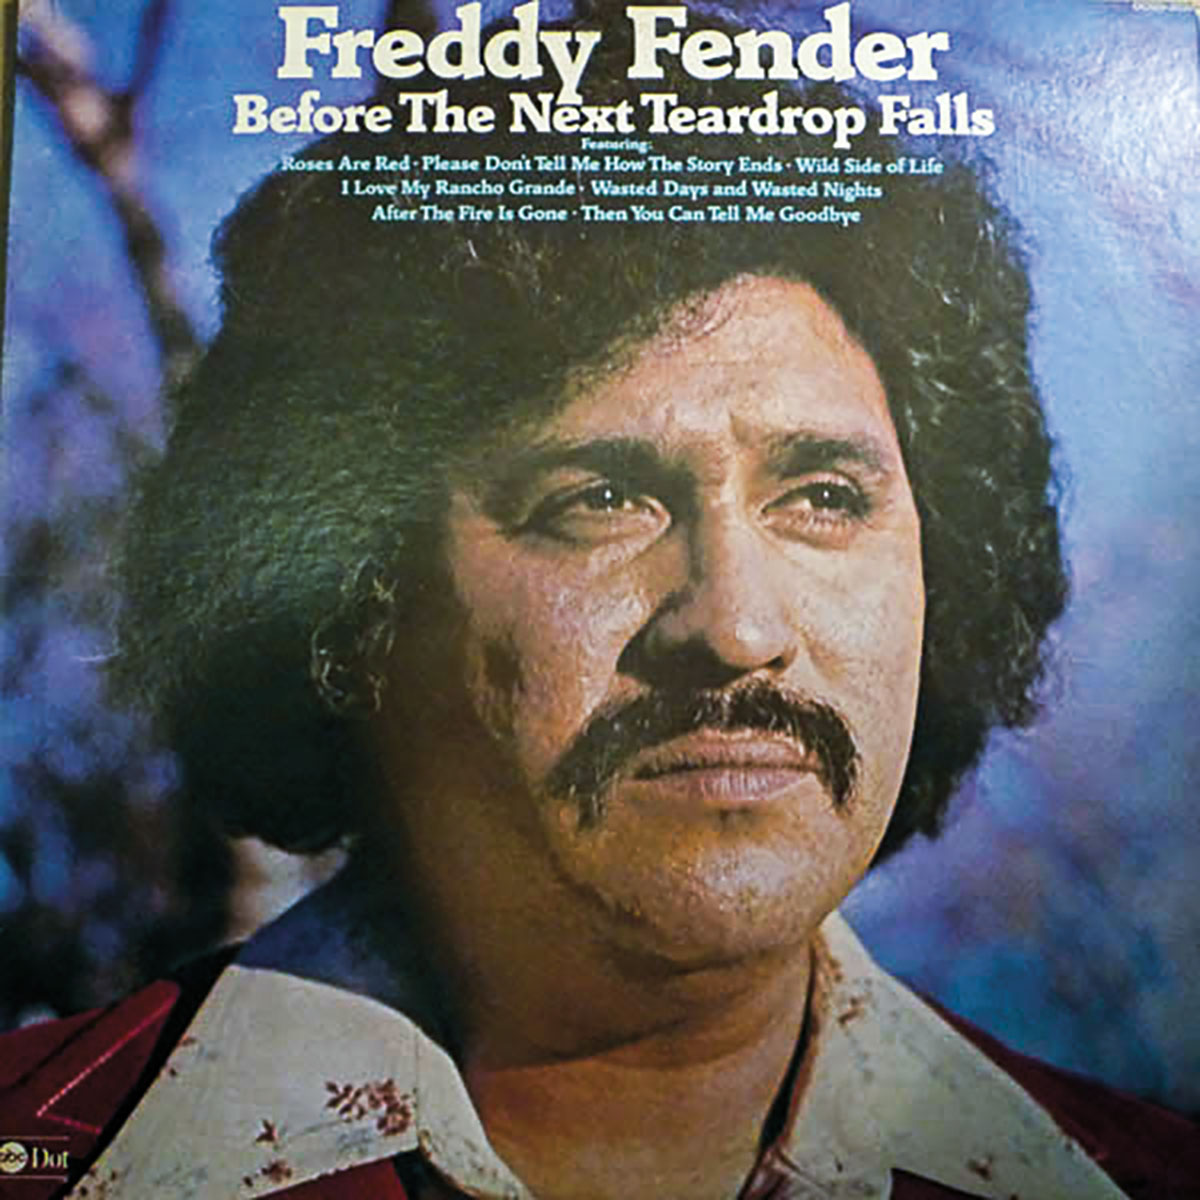 An album cover reading "Freddy Fender Before the Next Teardrop Falls"